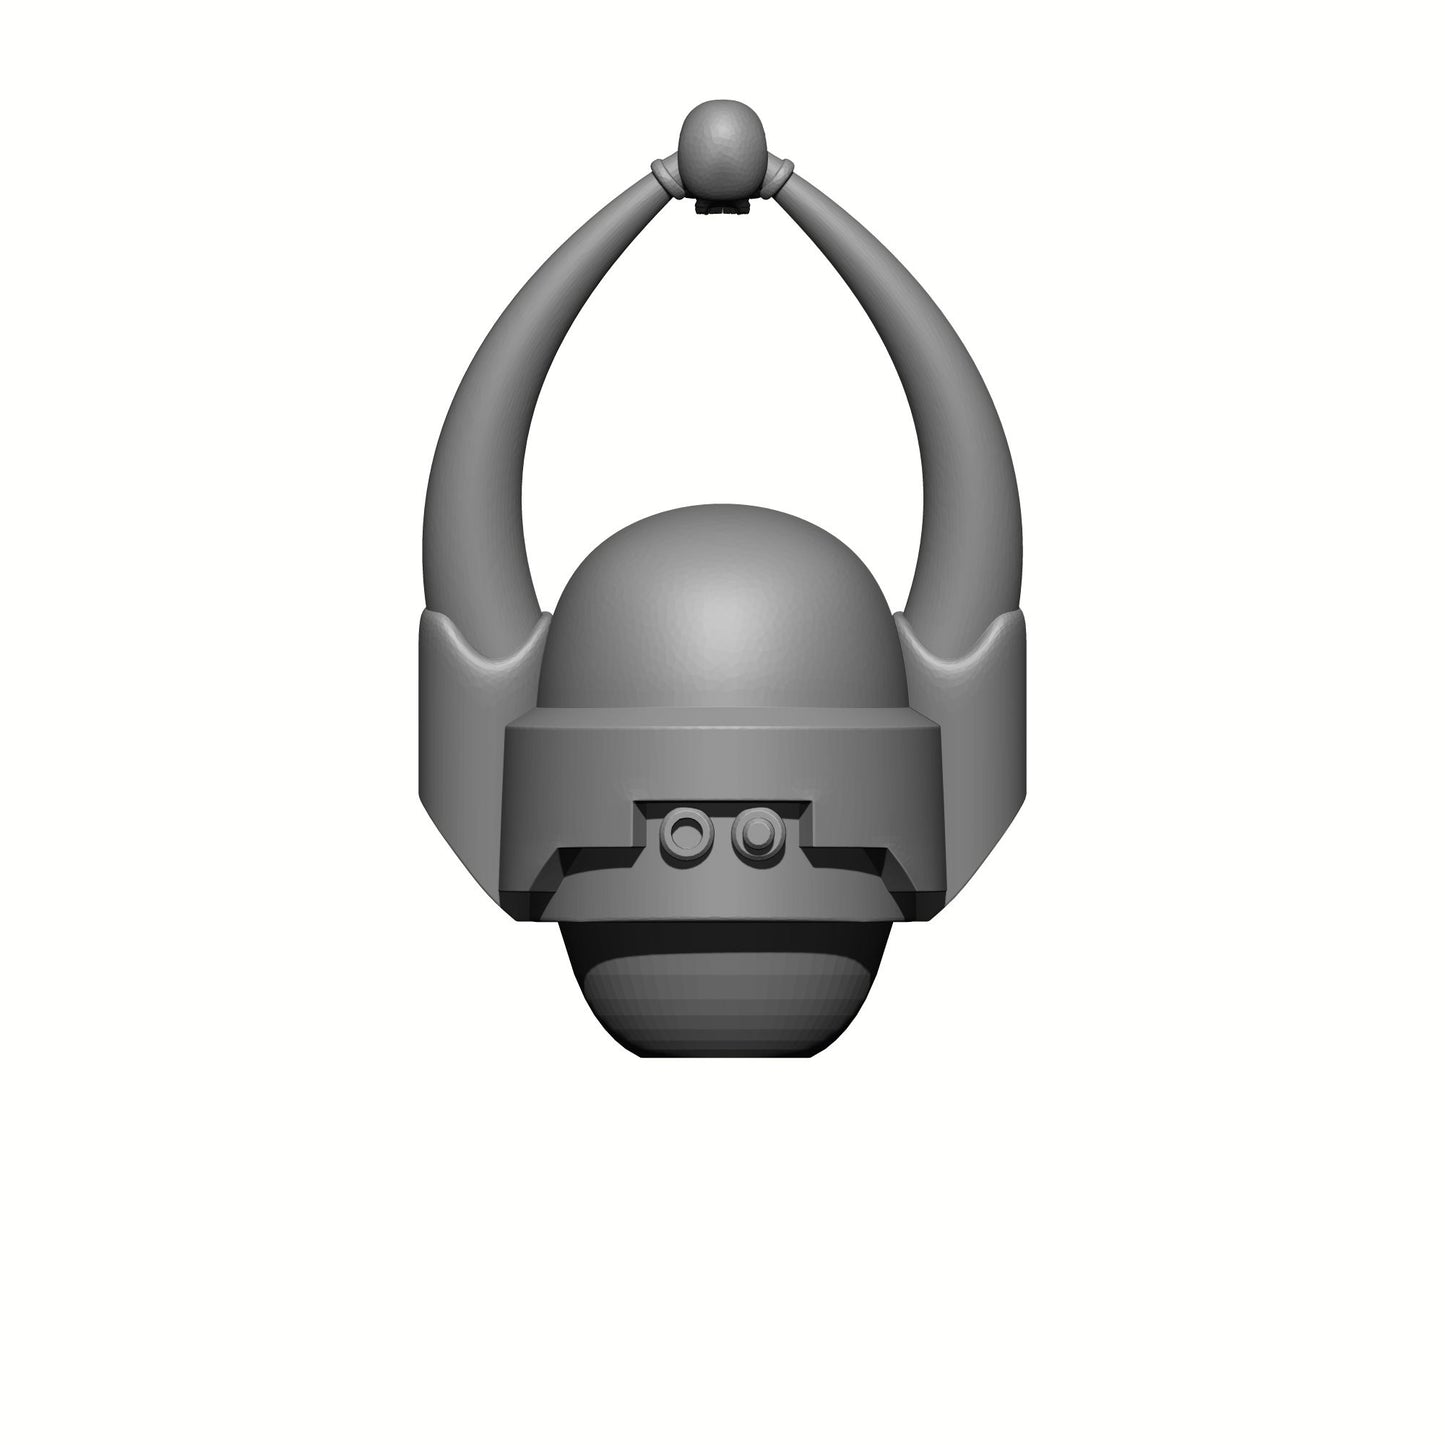 Crusader Helmet with Horns and Skull: Helmet Swap for JoyToy Warhammer 40K Compatible Chaos Space Marine 1:18 4" Action Figures